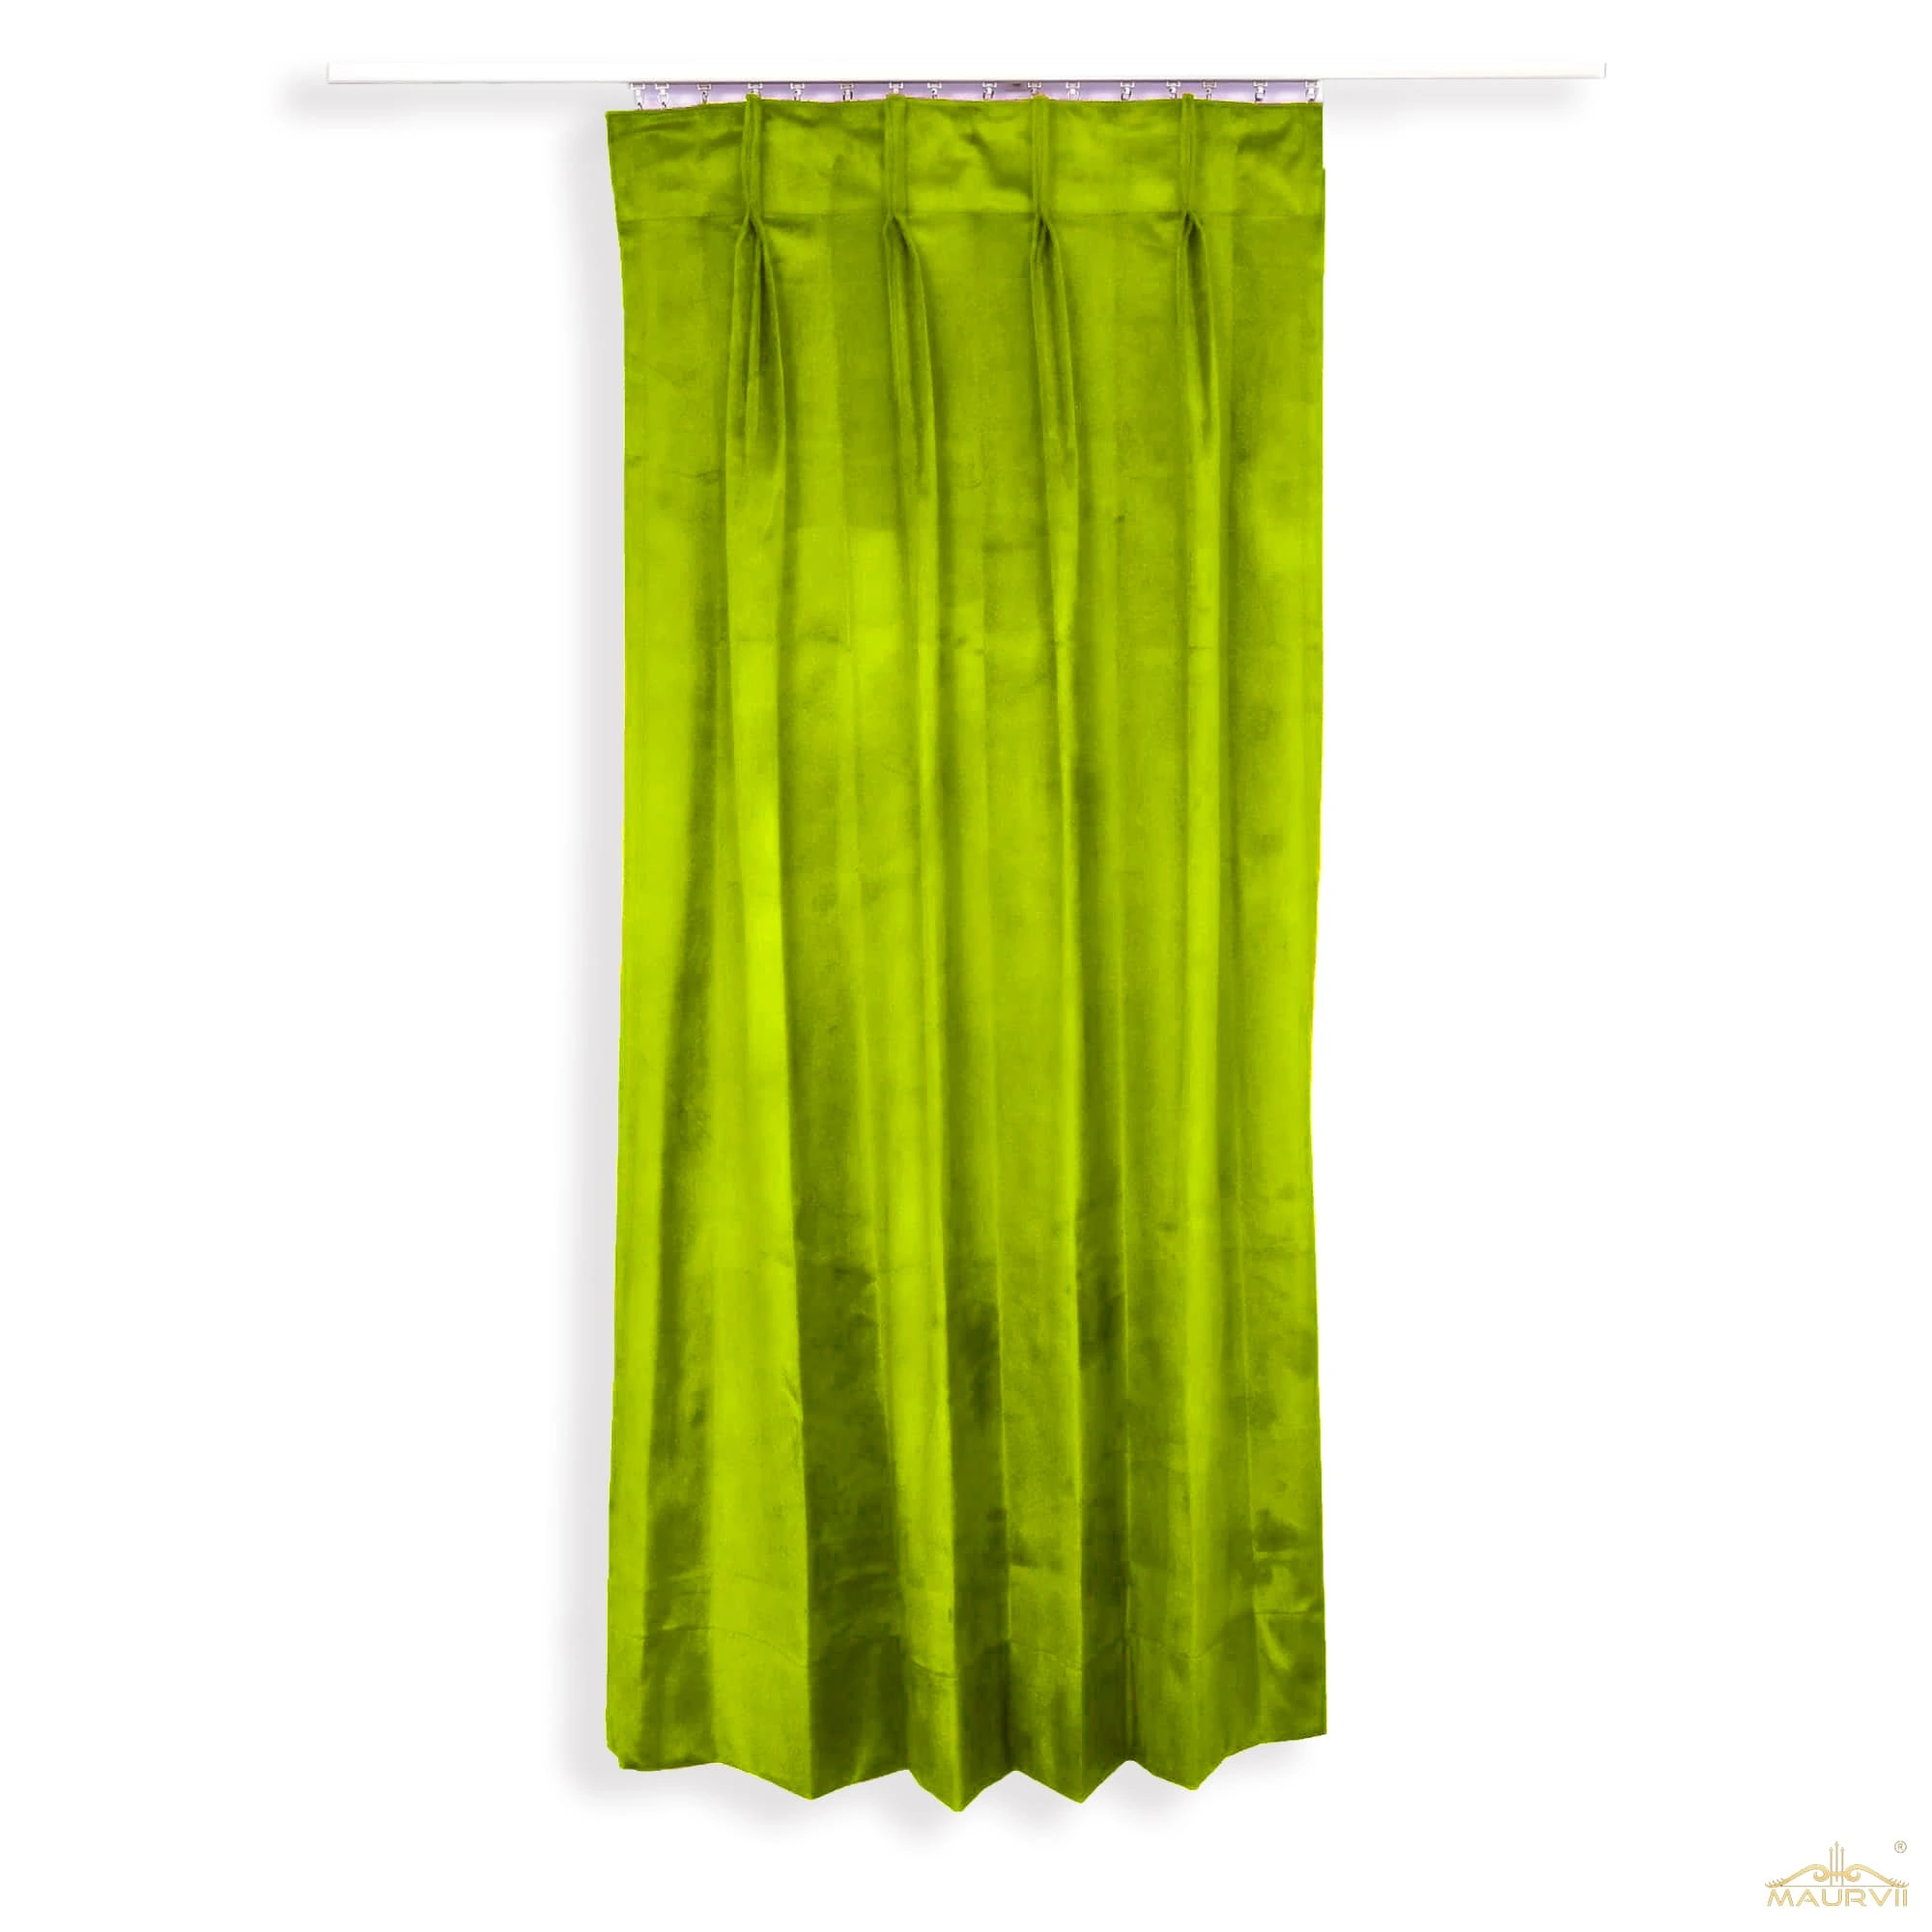 Pale green theater drapes